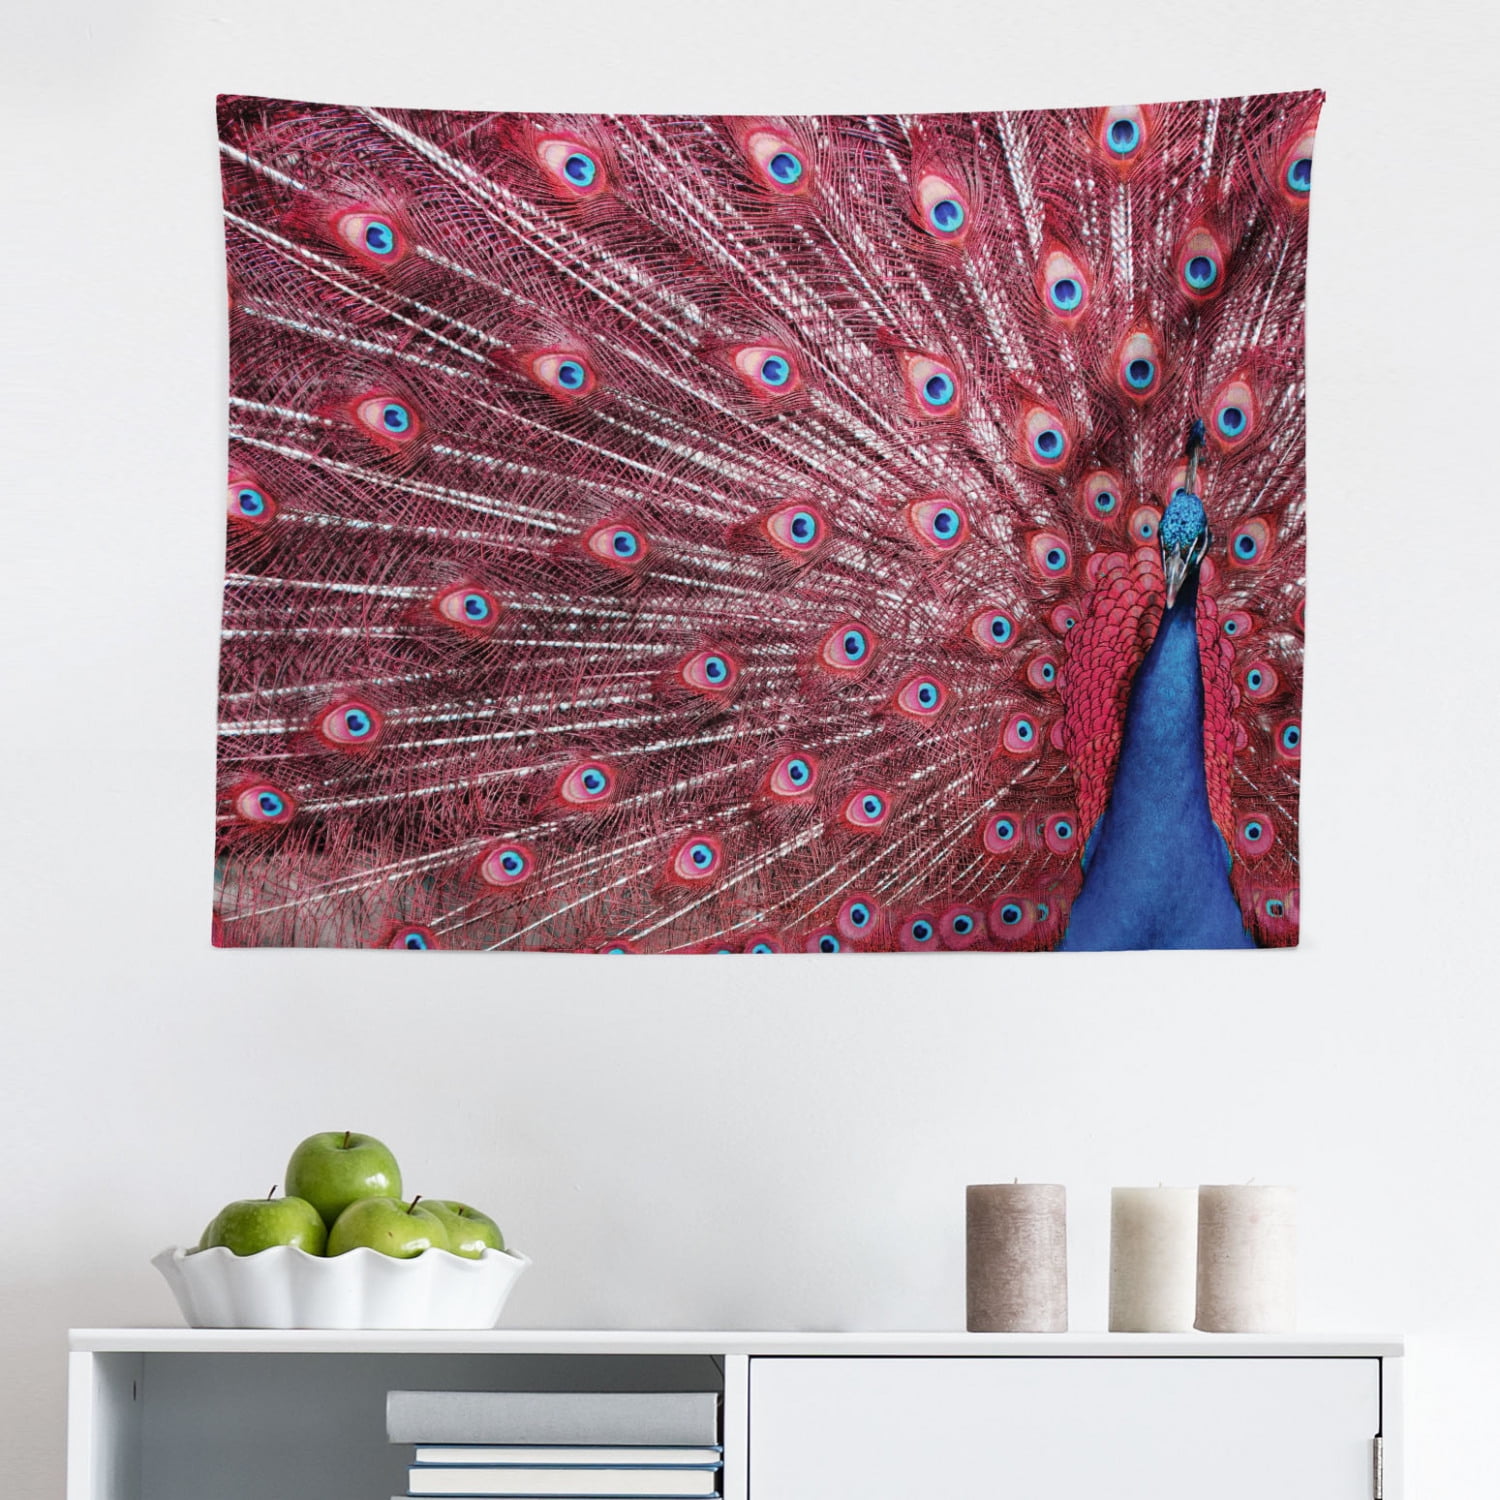 Indain Mandala Wall Decor Peacock Feather Cotton Home Decor Art Poster Tapestry